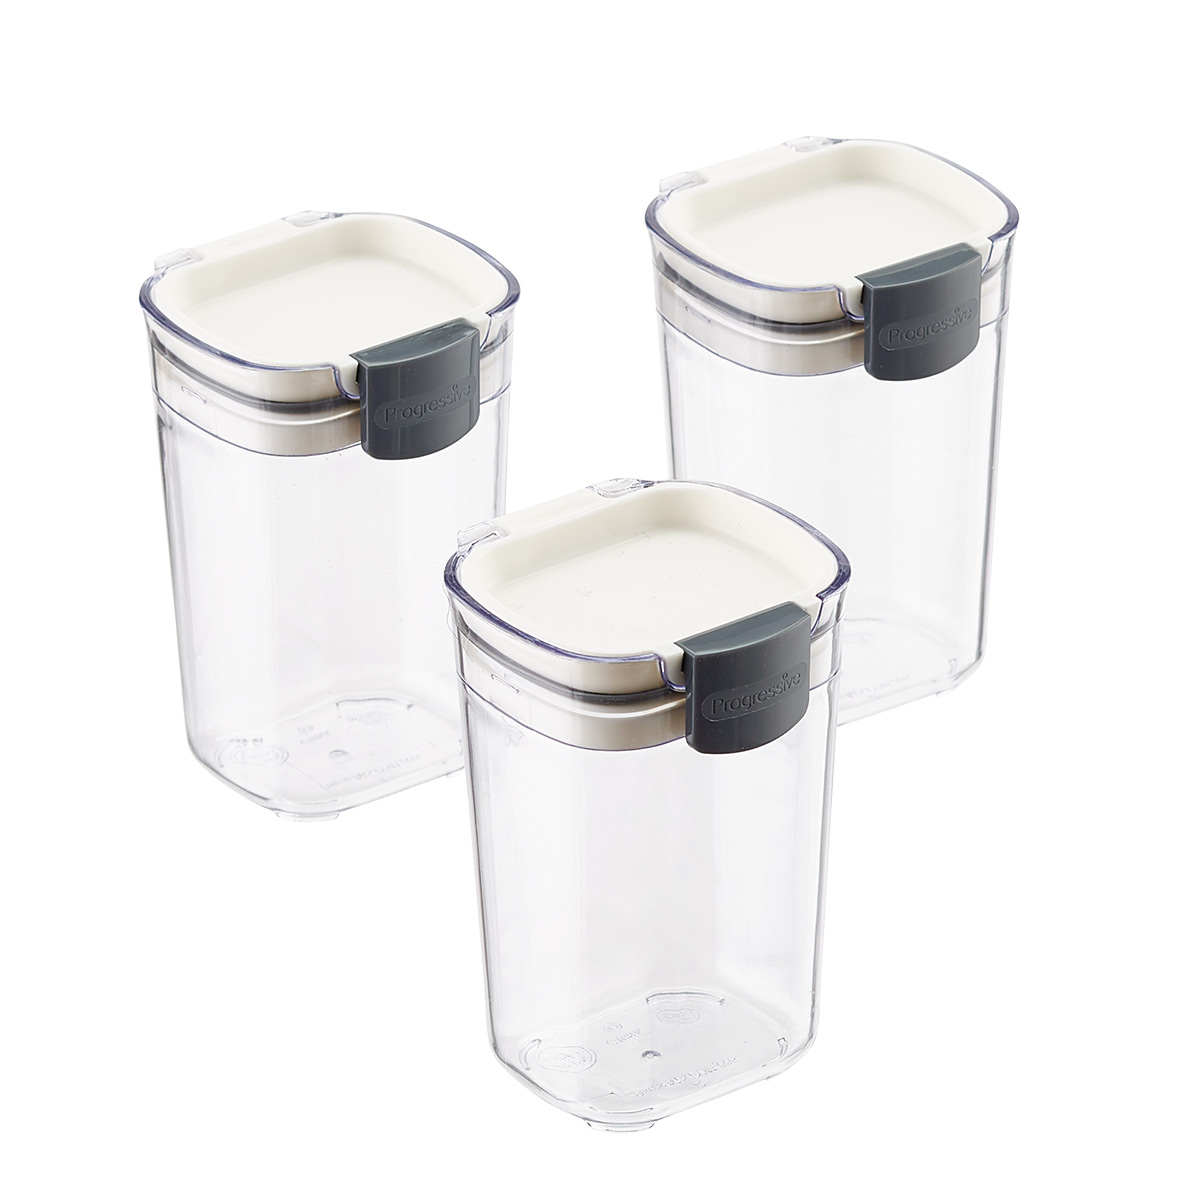 https://www.containerstore.com/catalogimages/364059/10077313-prokeeper-seasoning-keepers.jpg